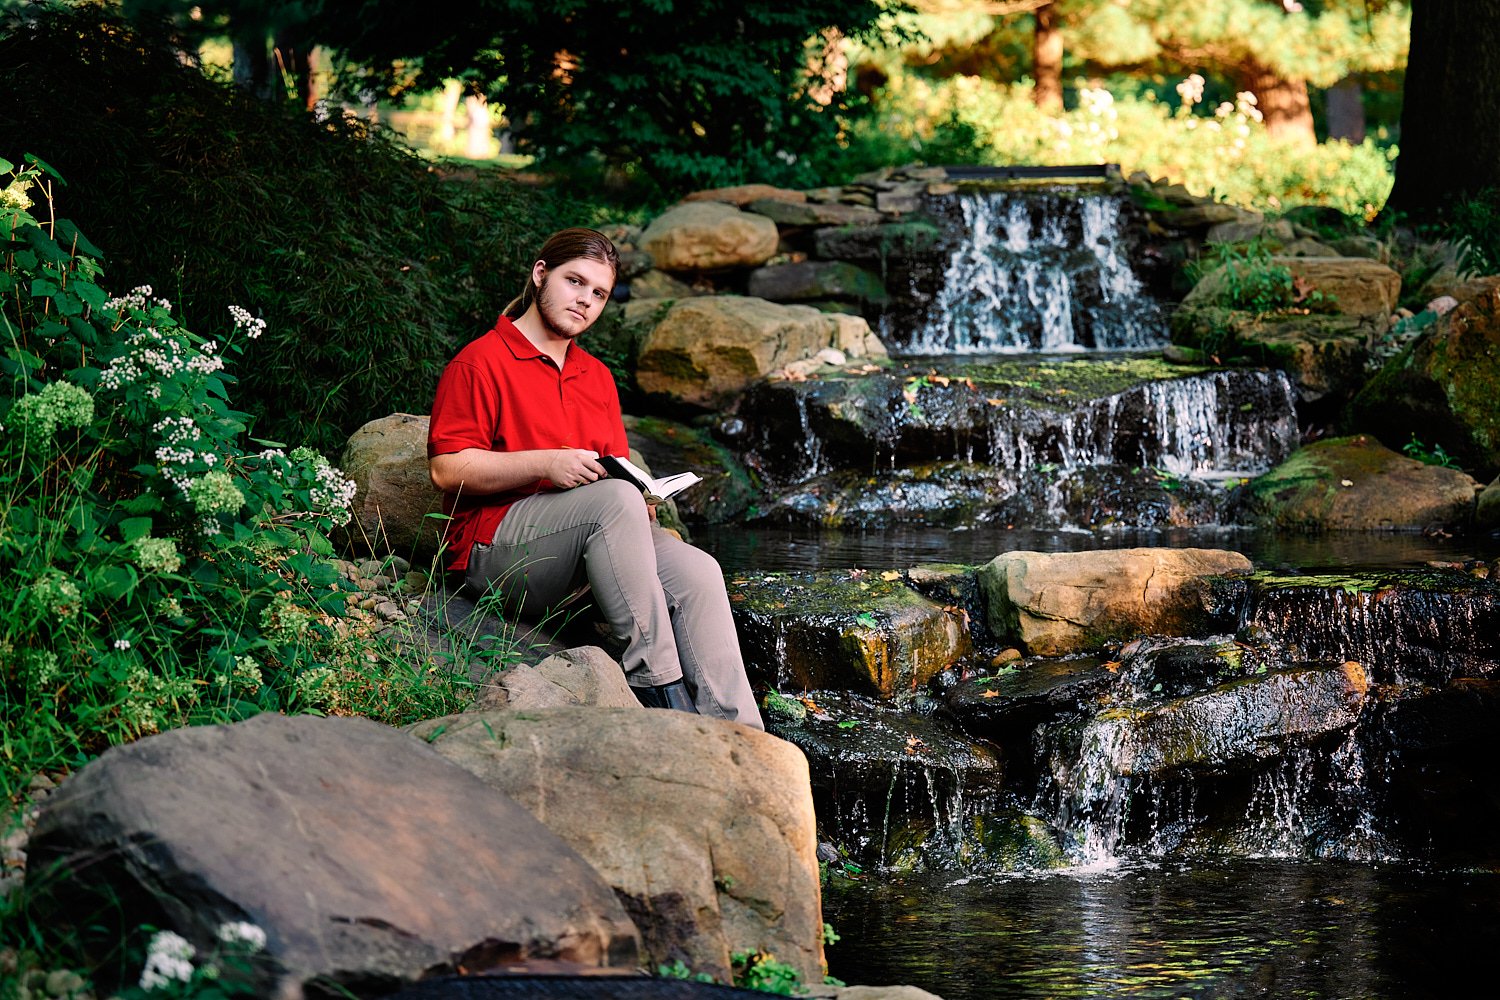  Zach Elkin of SA is posing for high school senior portraits in his family home in Sewickley Heights. He looks handsome in suit, polo shirt and playing with his dogs - in the backyard and in the house 